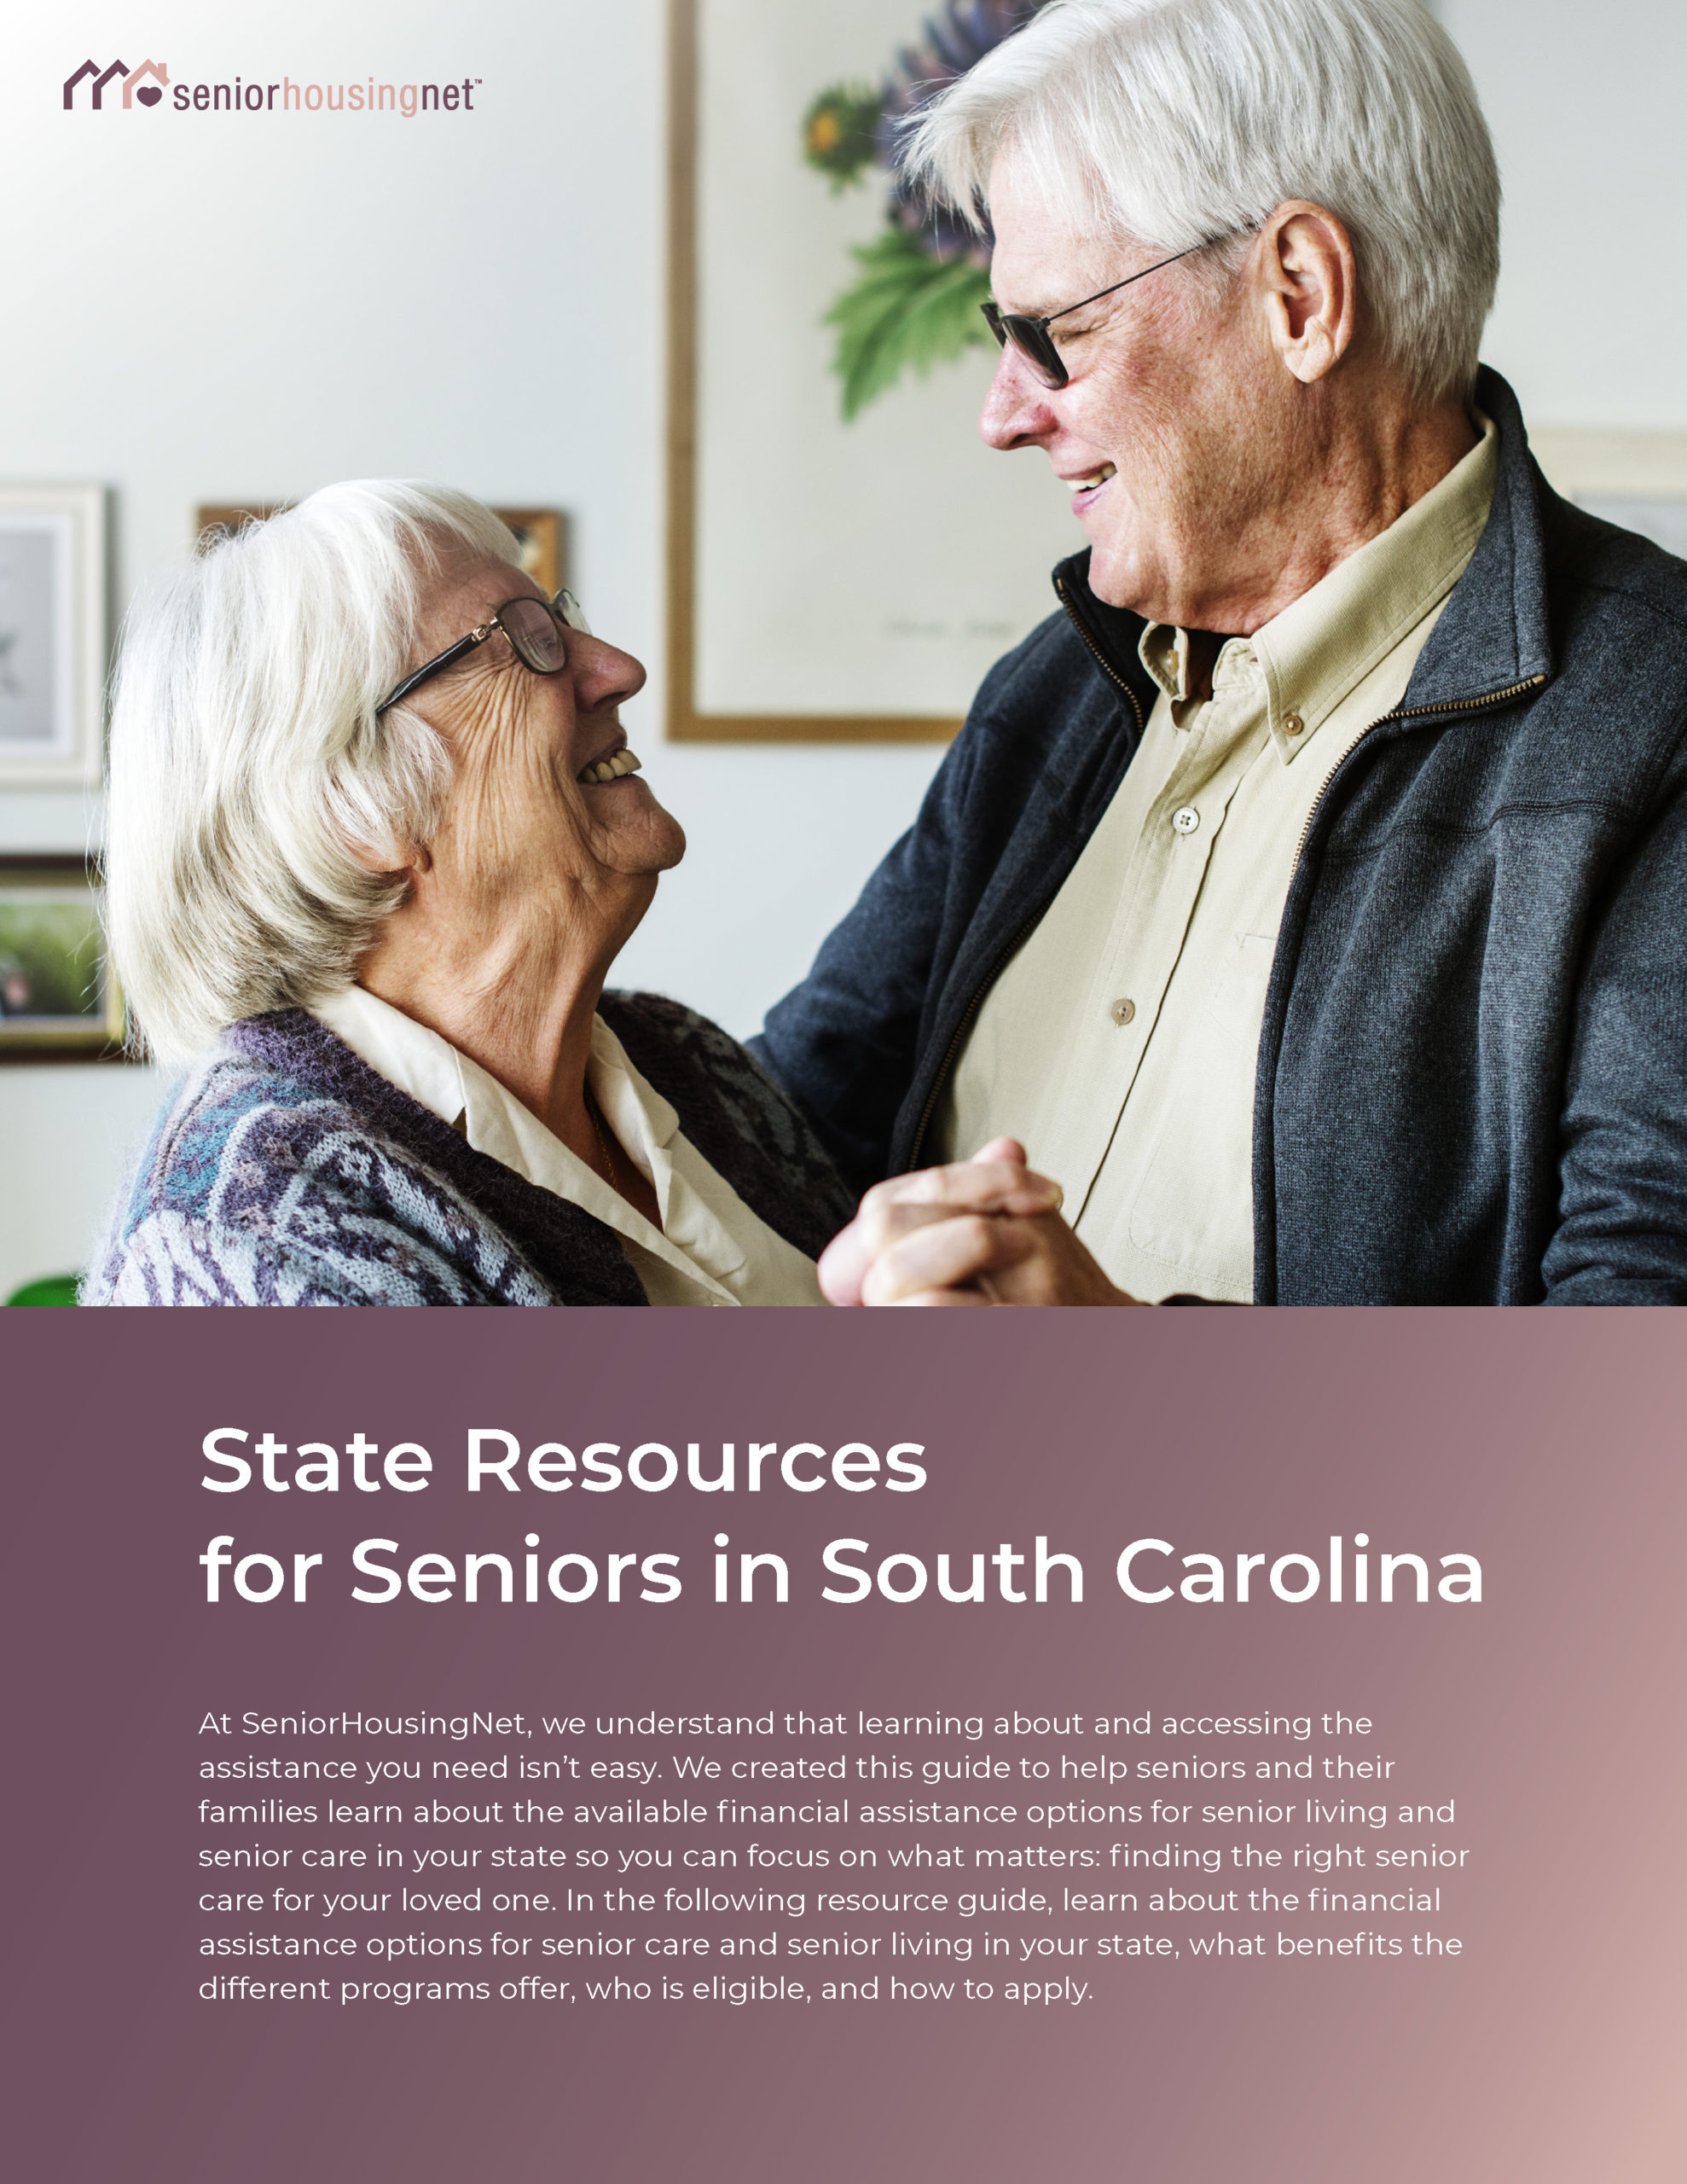 State Resources for Seniors in South Carolina